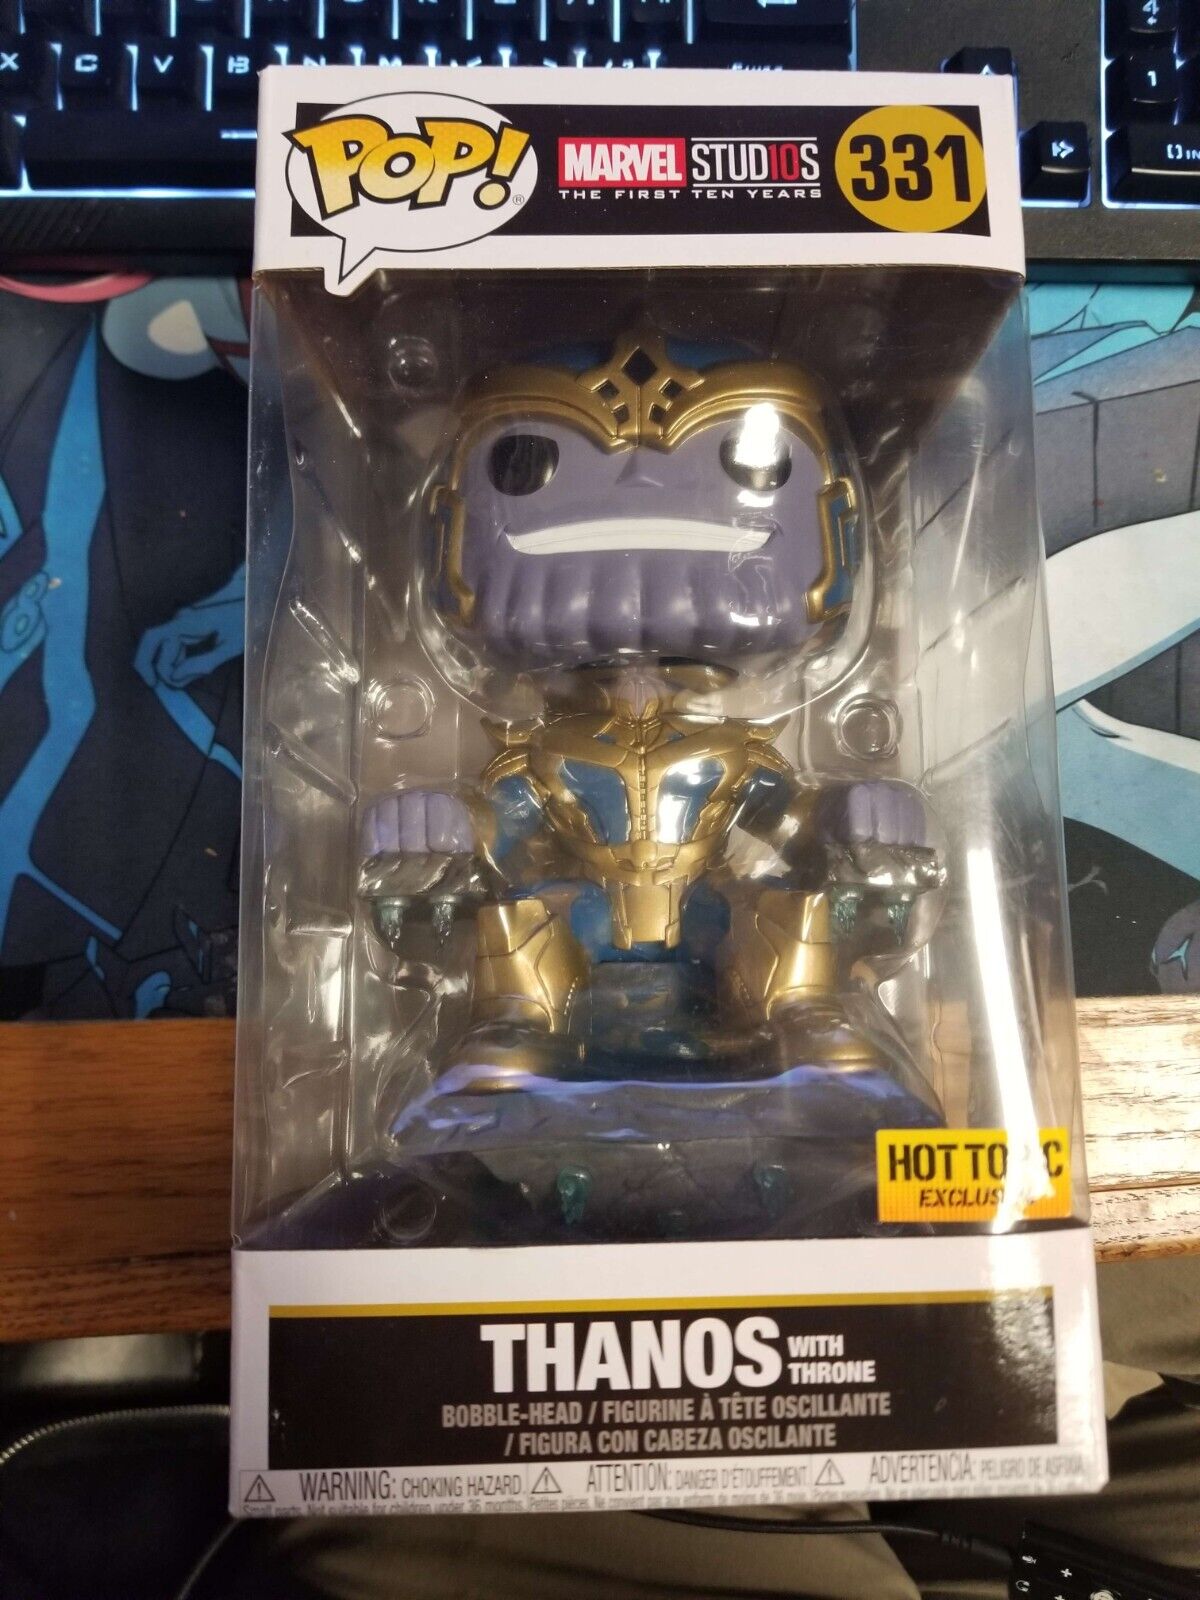 Funko Pop Deluxe: Marvel - Thanos with Throne - Hot Topic (HT) (Exclusive) #331